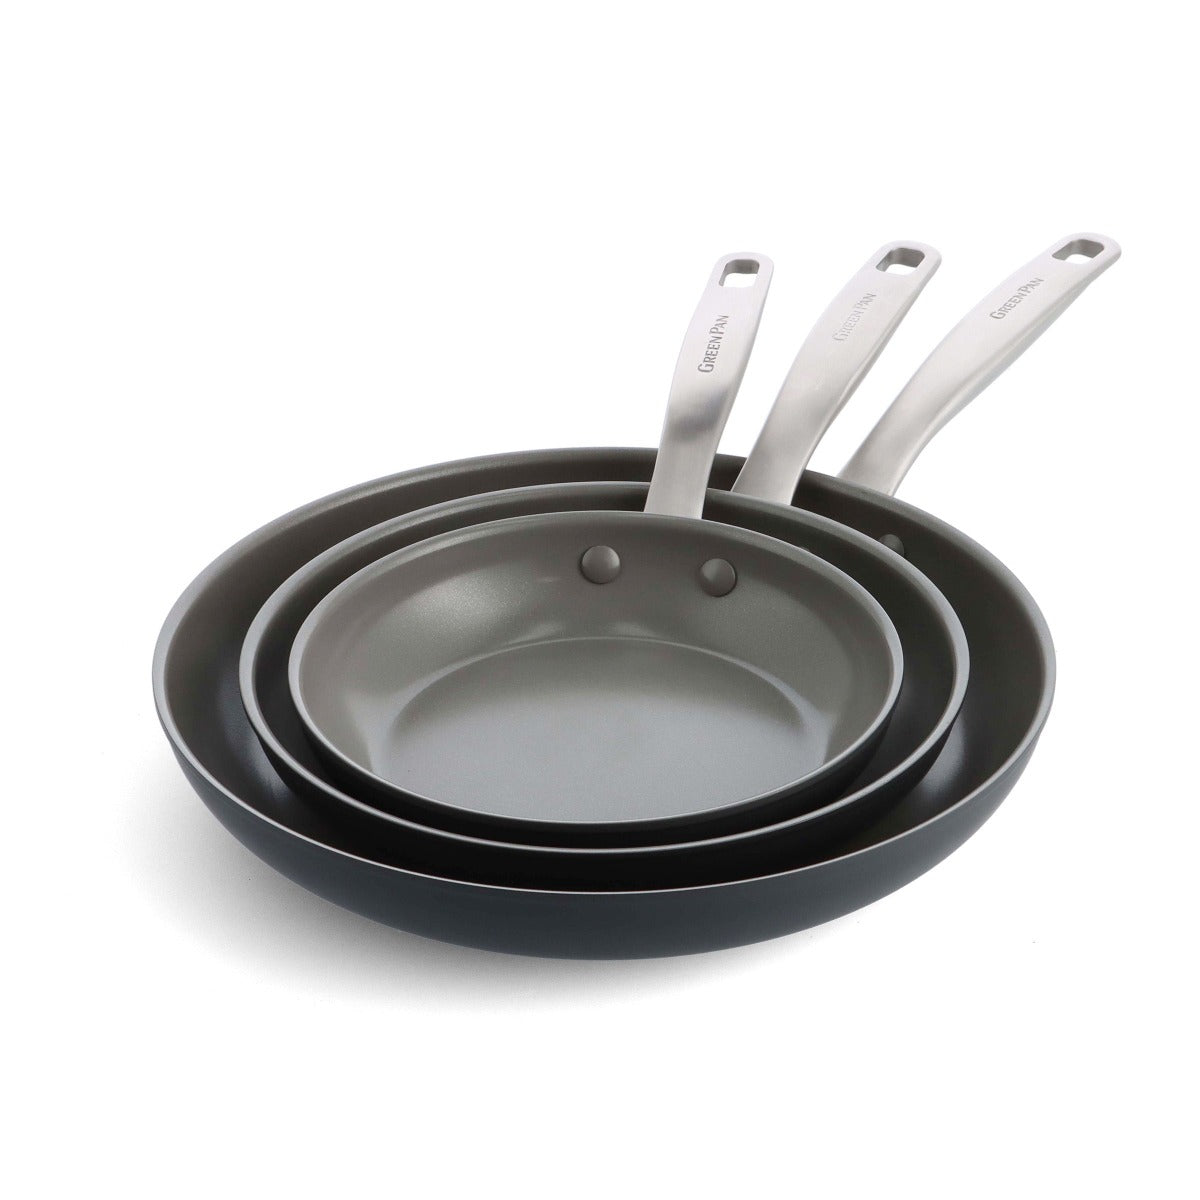 Chatham Ceramic Nonstick 8, 9.5 and 11 Frypan Set